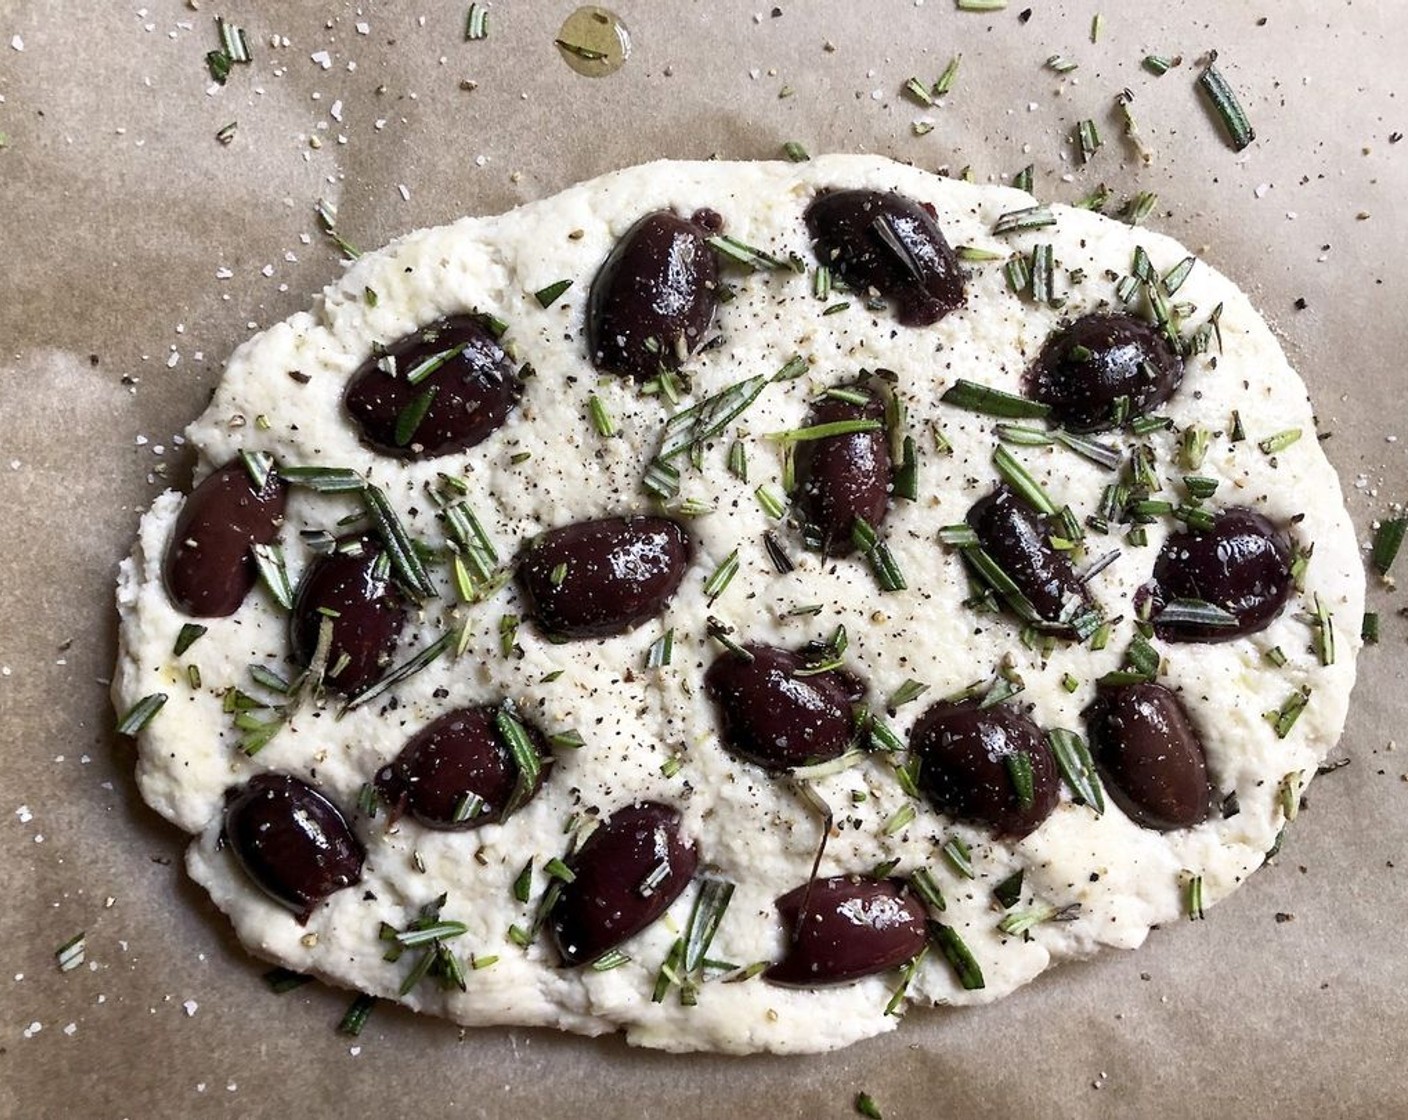 step 11 For the focaccia with olives and rosemary: Strew the Kalamata Olives (2 1/2 cups) over the surface of the dough. Allow some of the dough surface to show through the olives. Sprinkle with Fresh Rosemary (3/4 tsp). Season with Coarse Salt (to taste) and Freshly Ground Black Pepper (to taste). Finish with a light drizzle of Extra-Virgin Olive Oil (1 tsp).